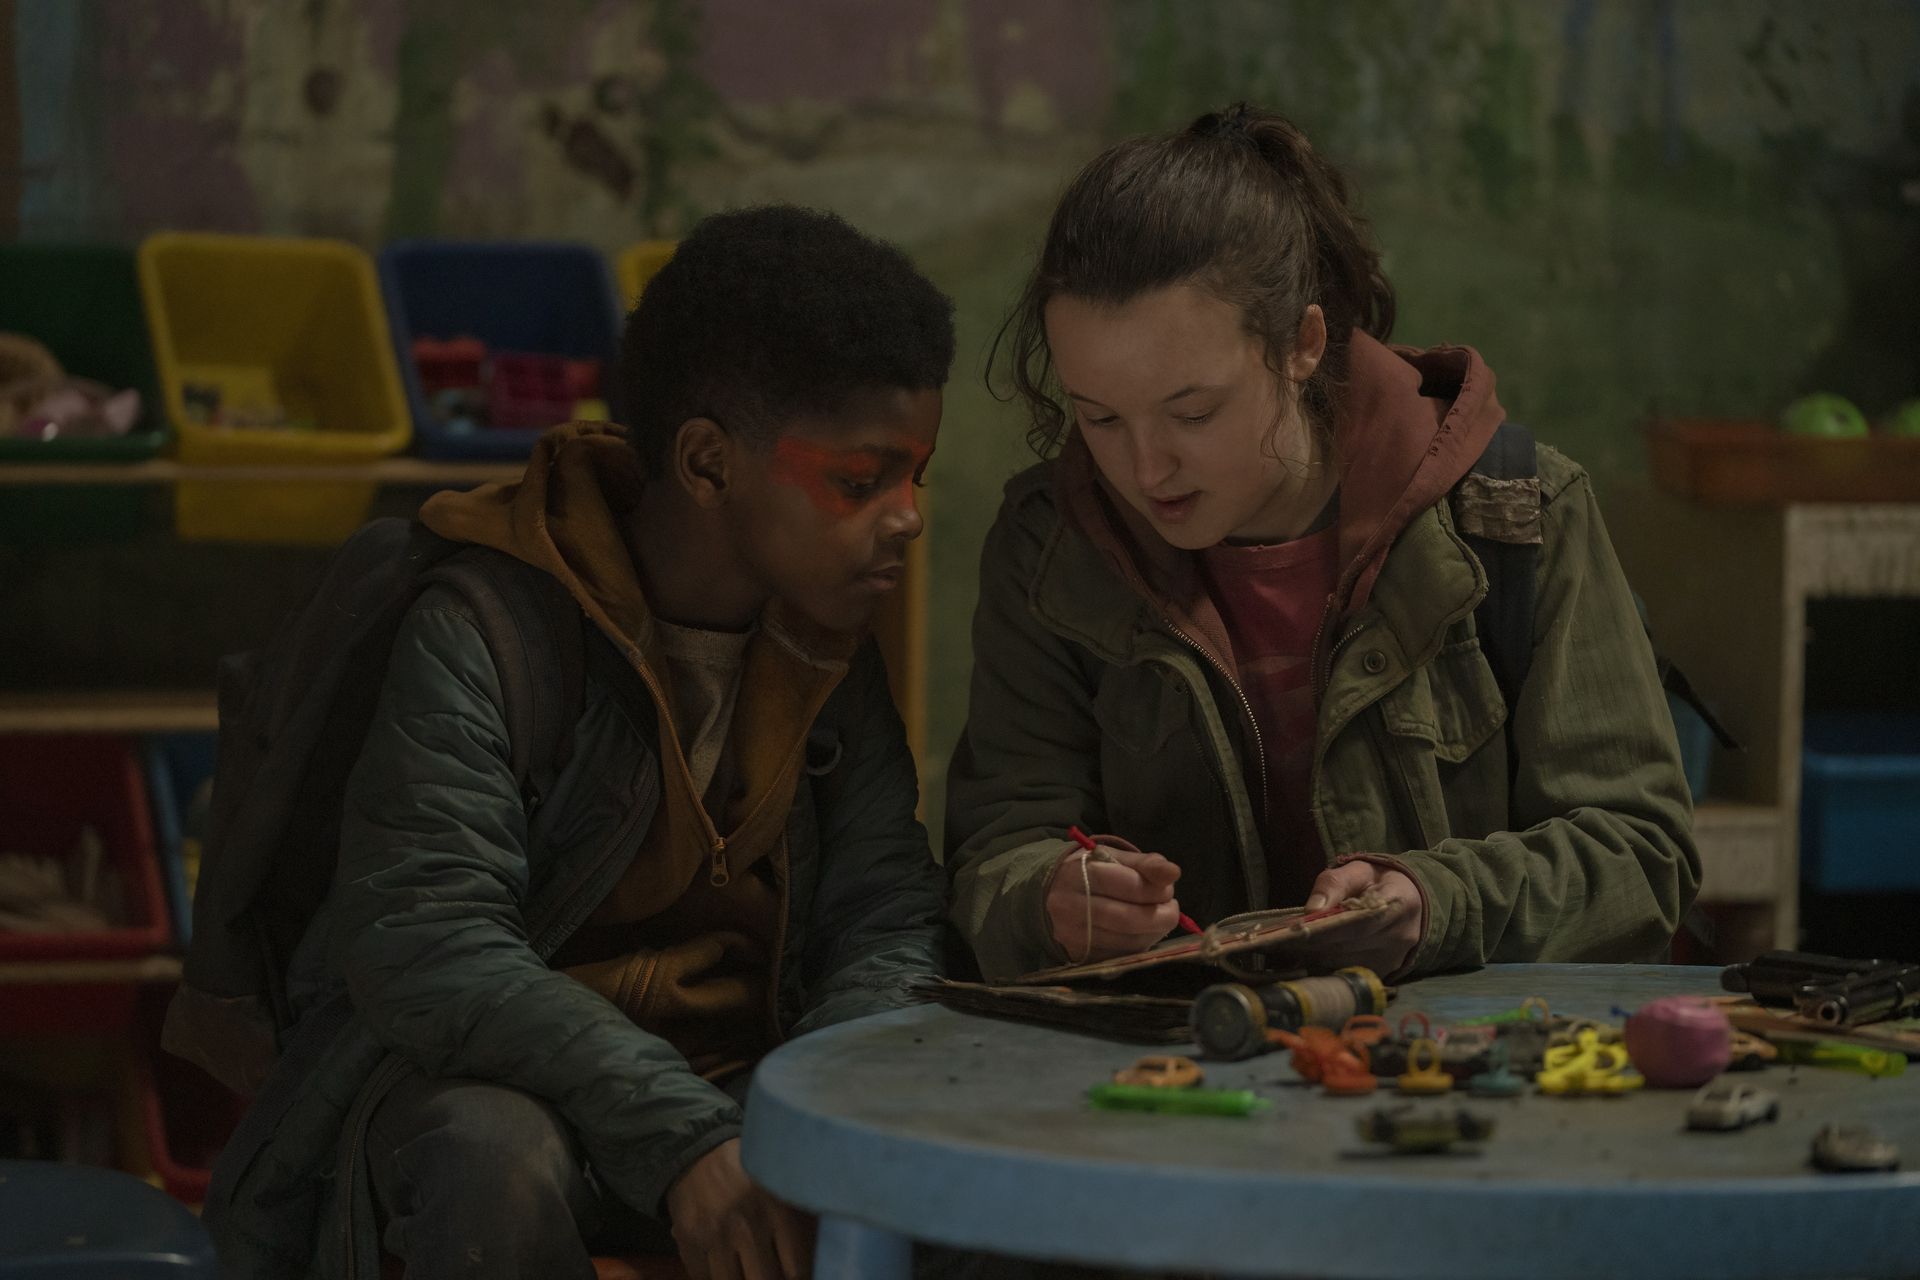 The Last of Us': Who is Kathleen, Melanie Lynskey's Character Not